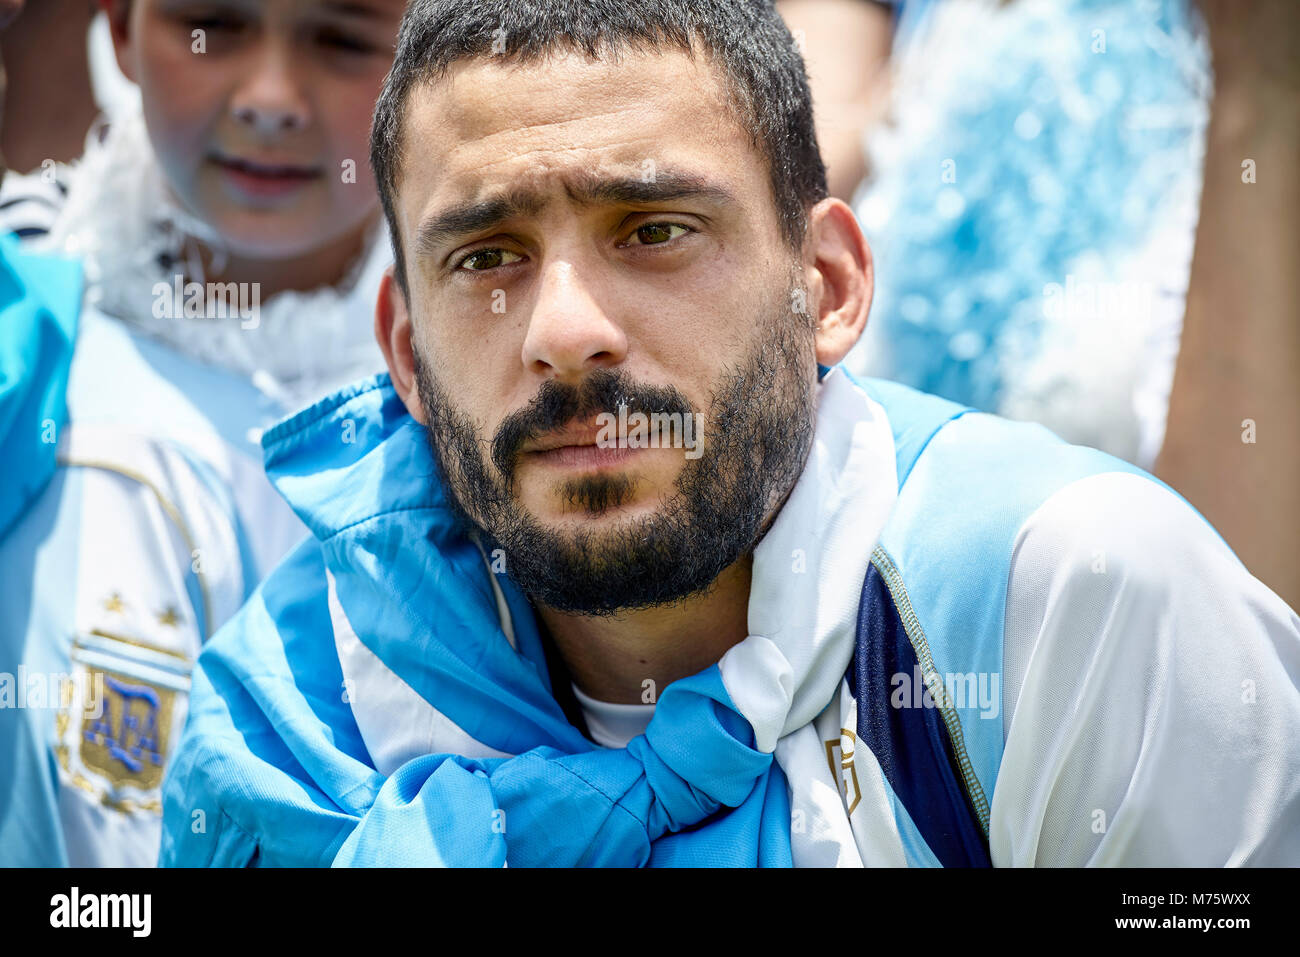 Argentinian football fan looking anxious at match Stock Photo